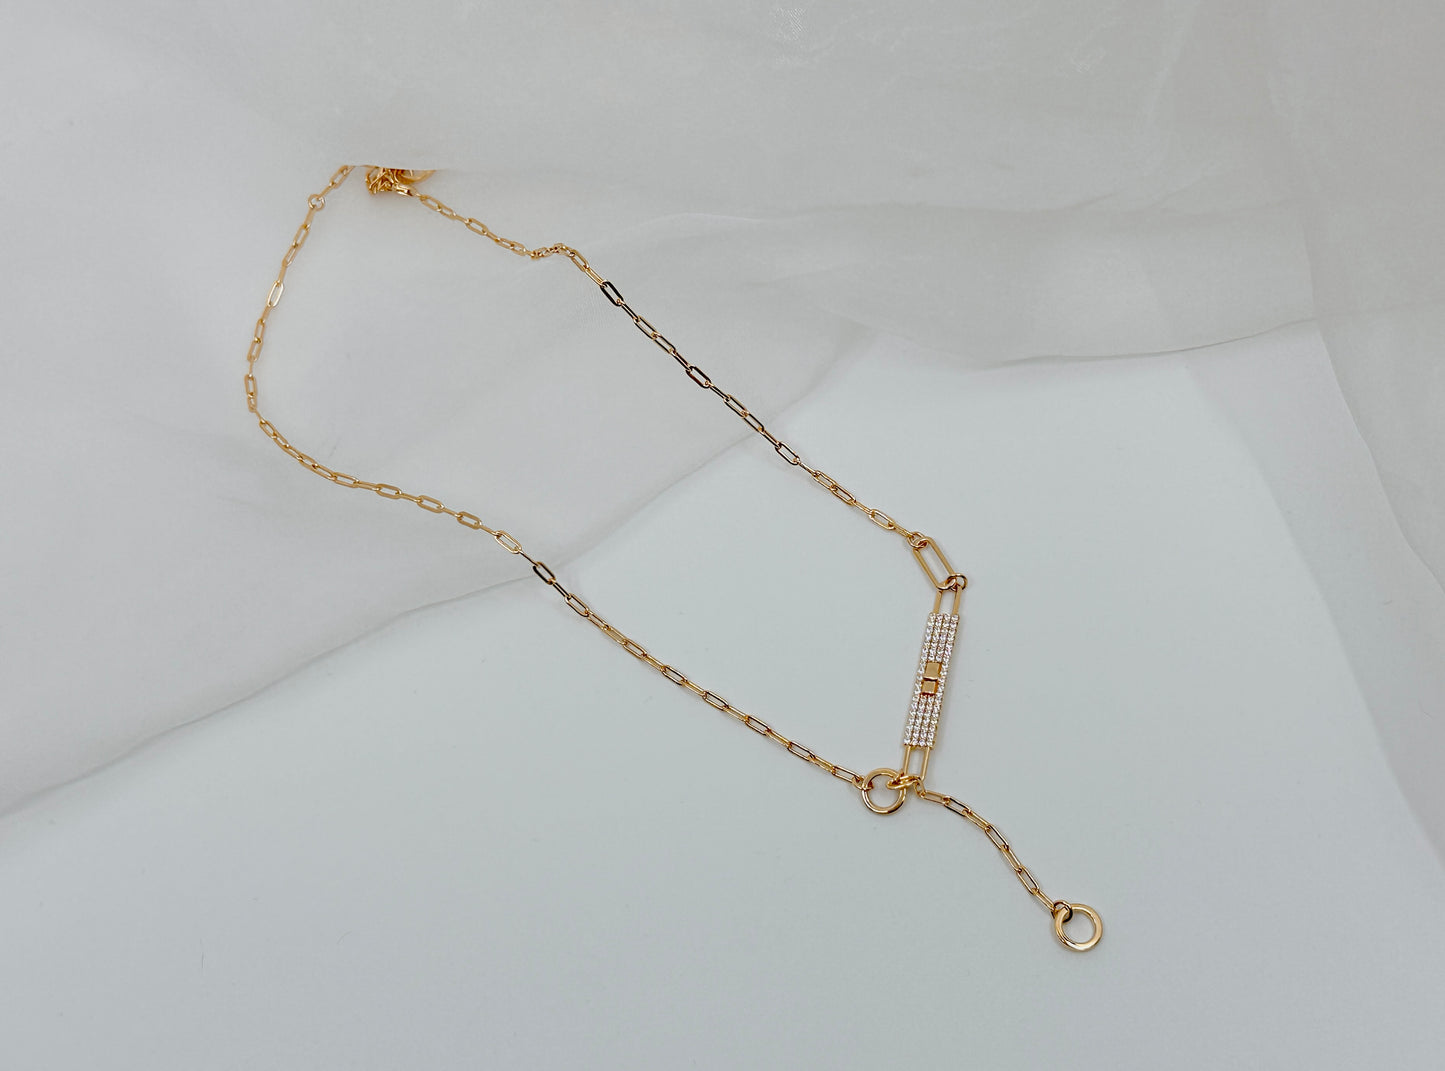 [S925 Silver] Once Again - Rose Gold Necklace